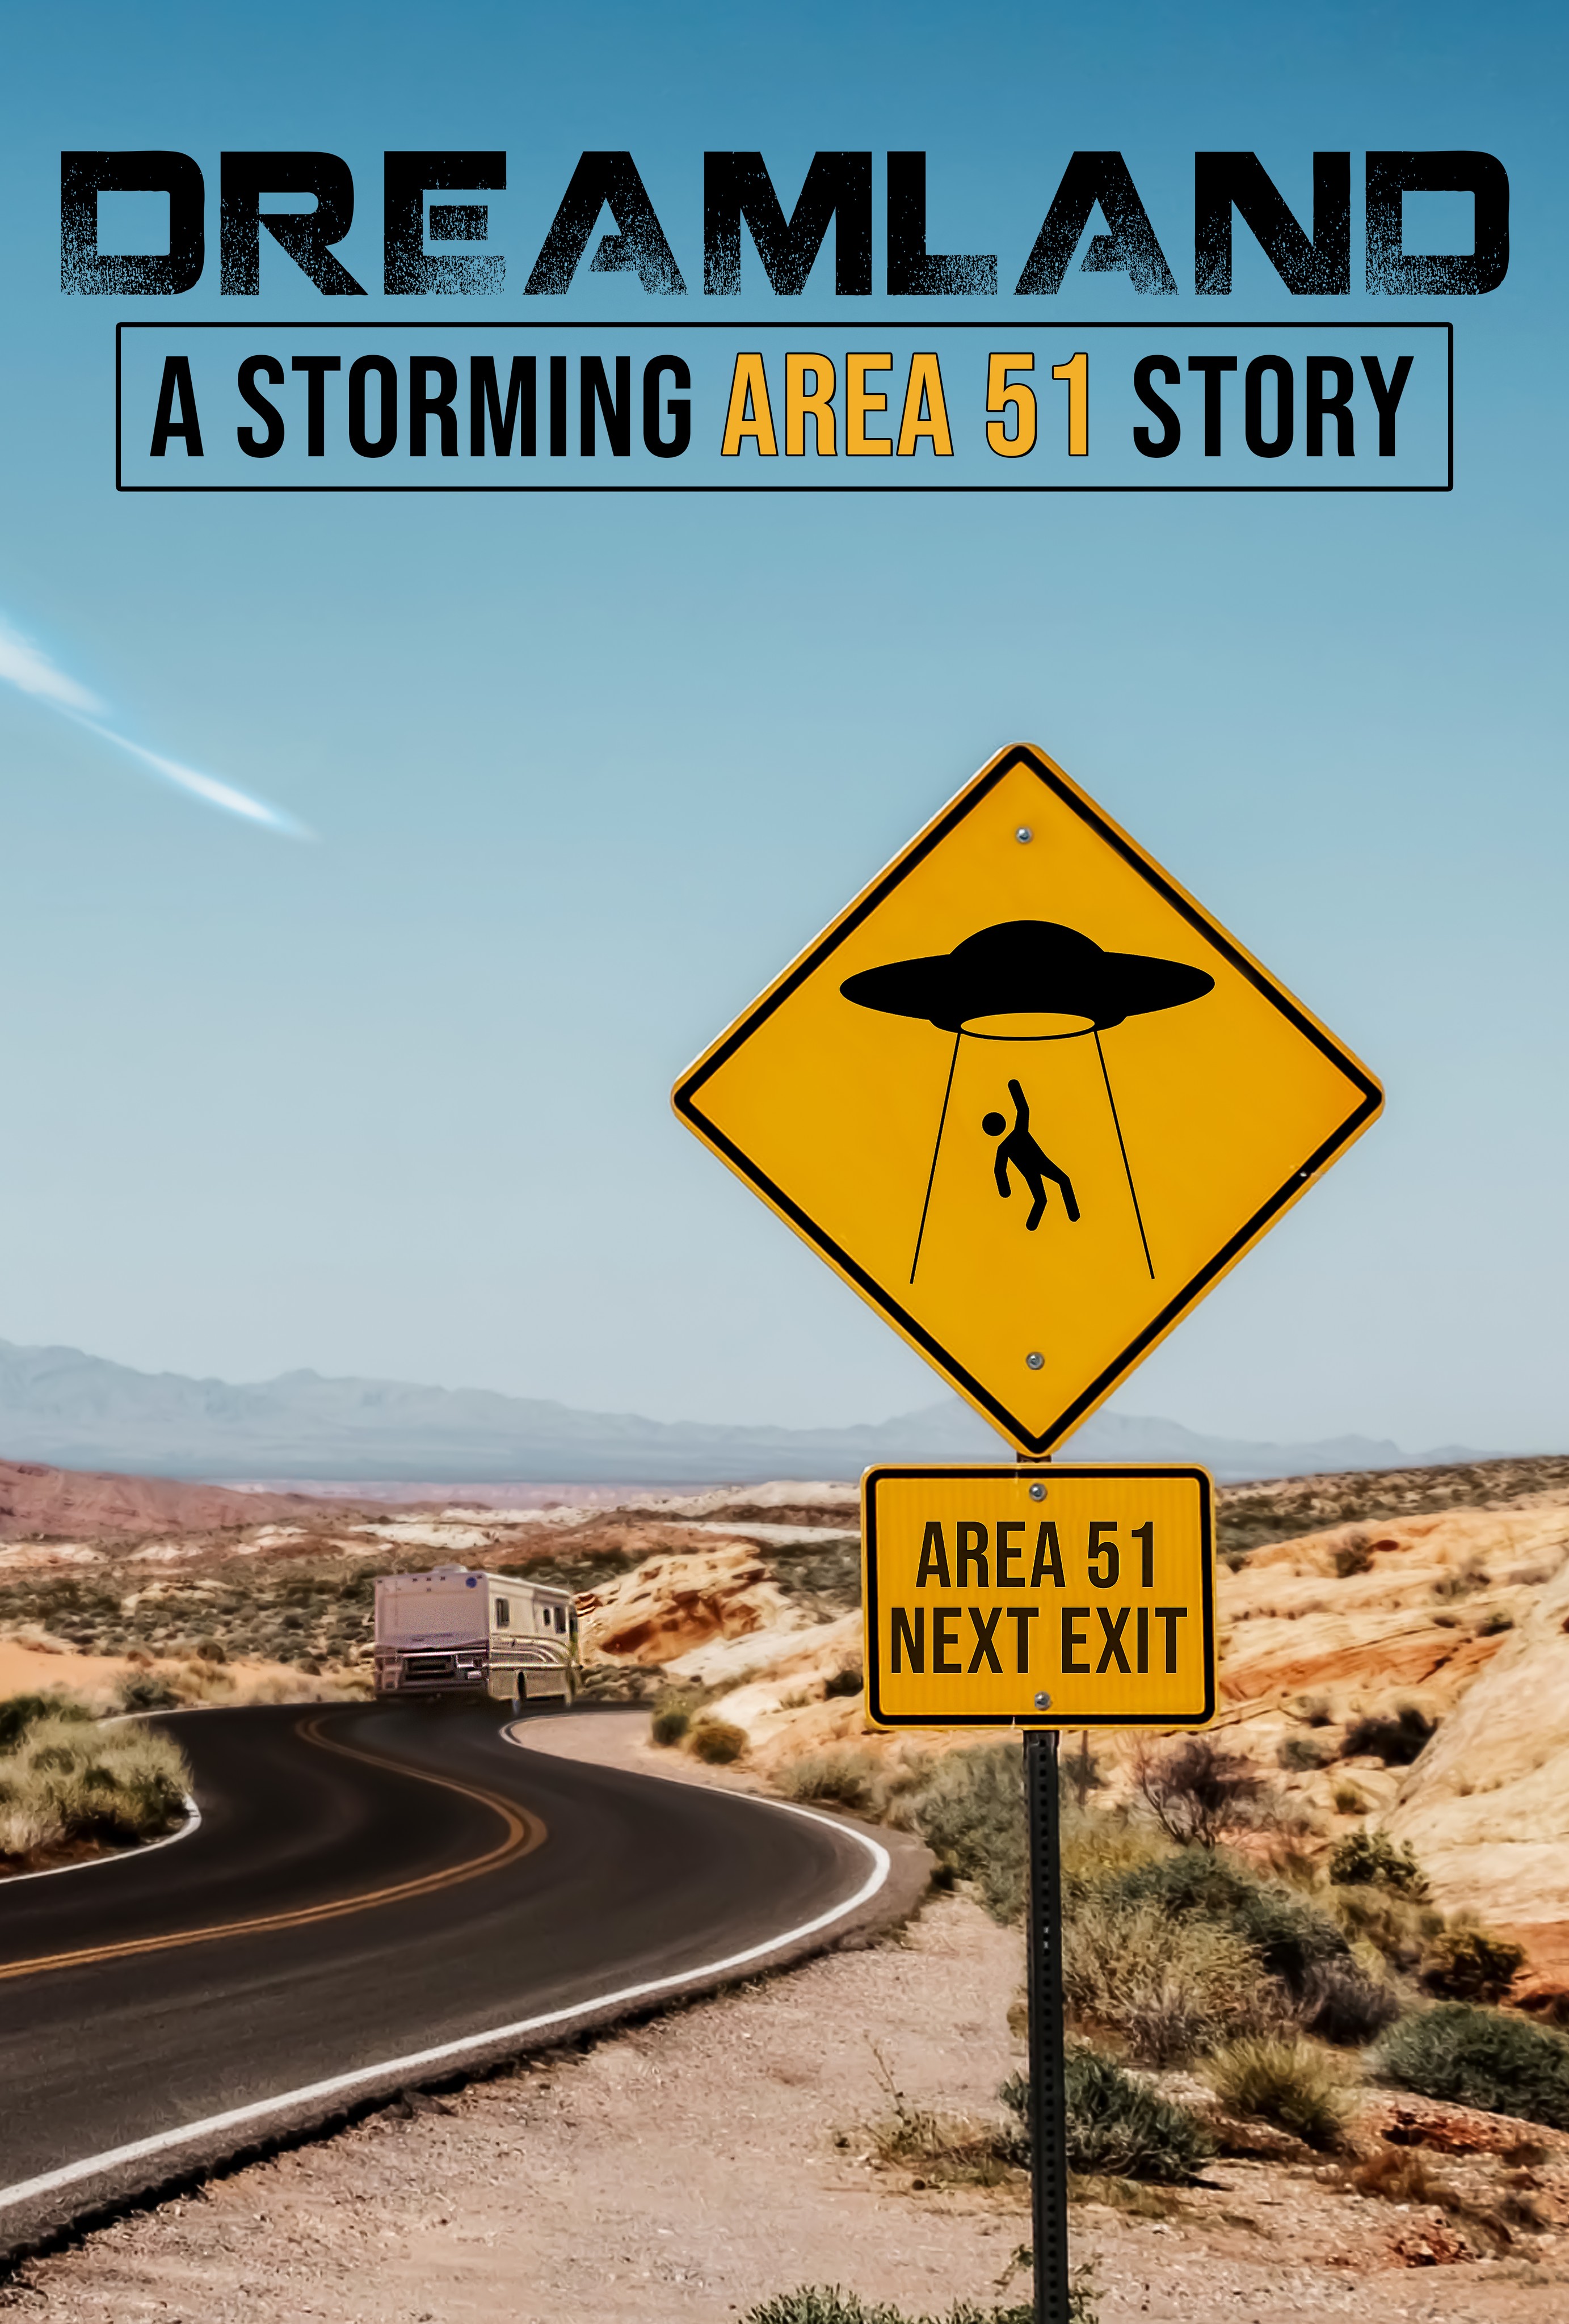 Here's how storming Area 51 will go, as predicted by video games